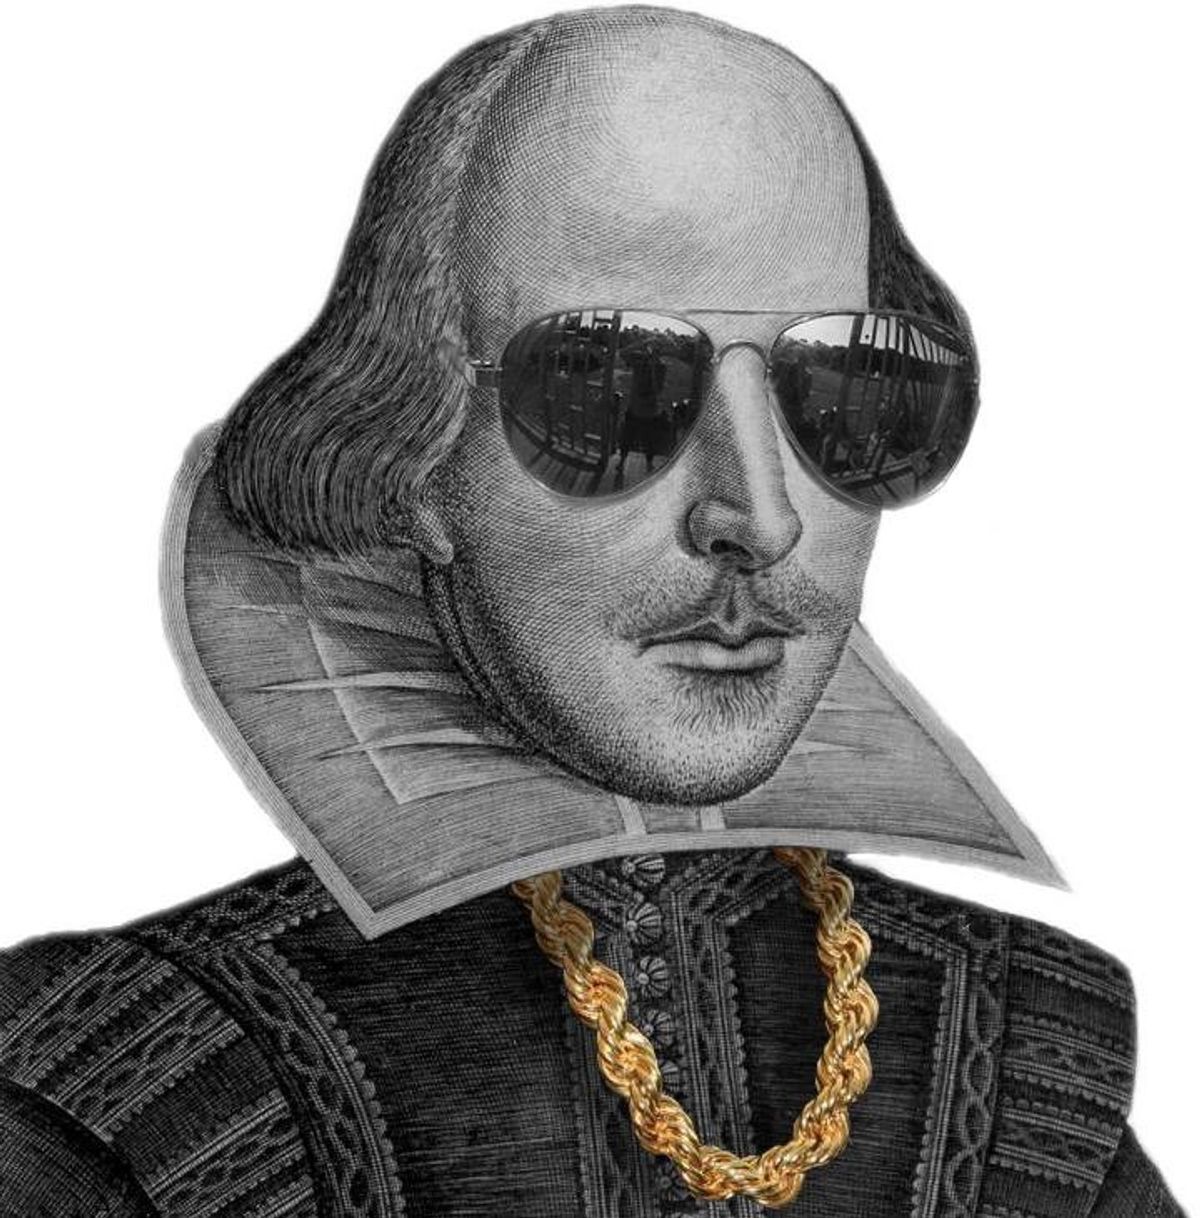 5 Reasons To Celebrate Shakespeare And His Works